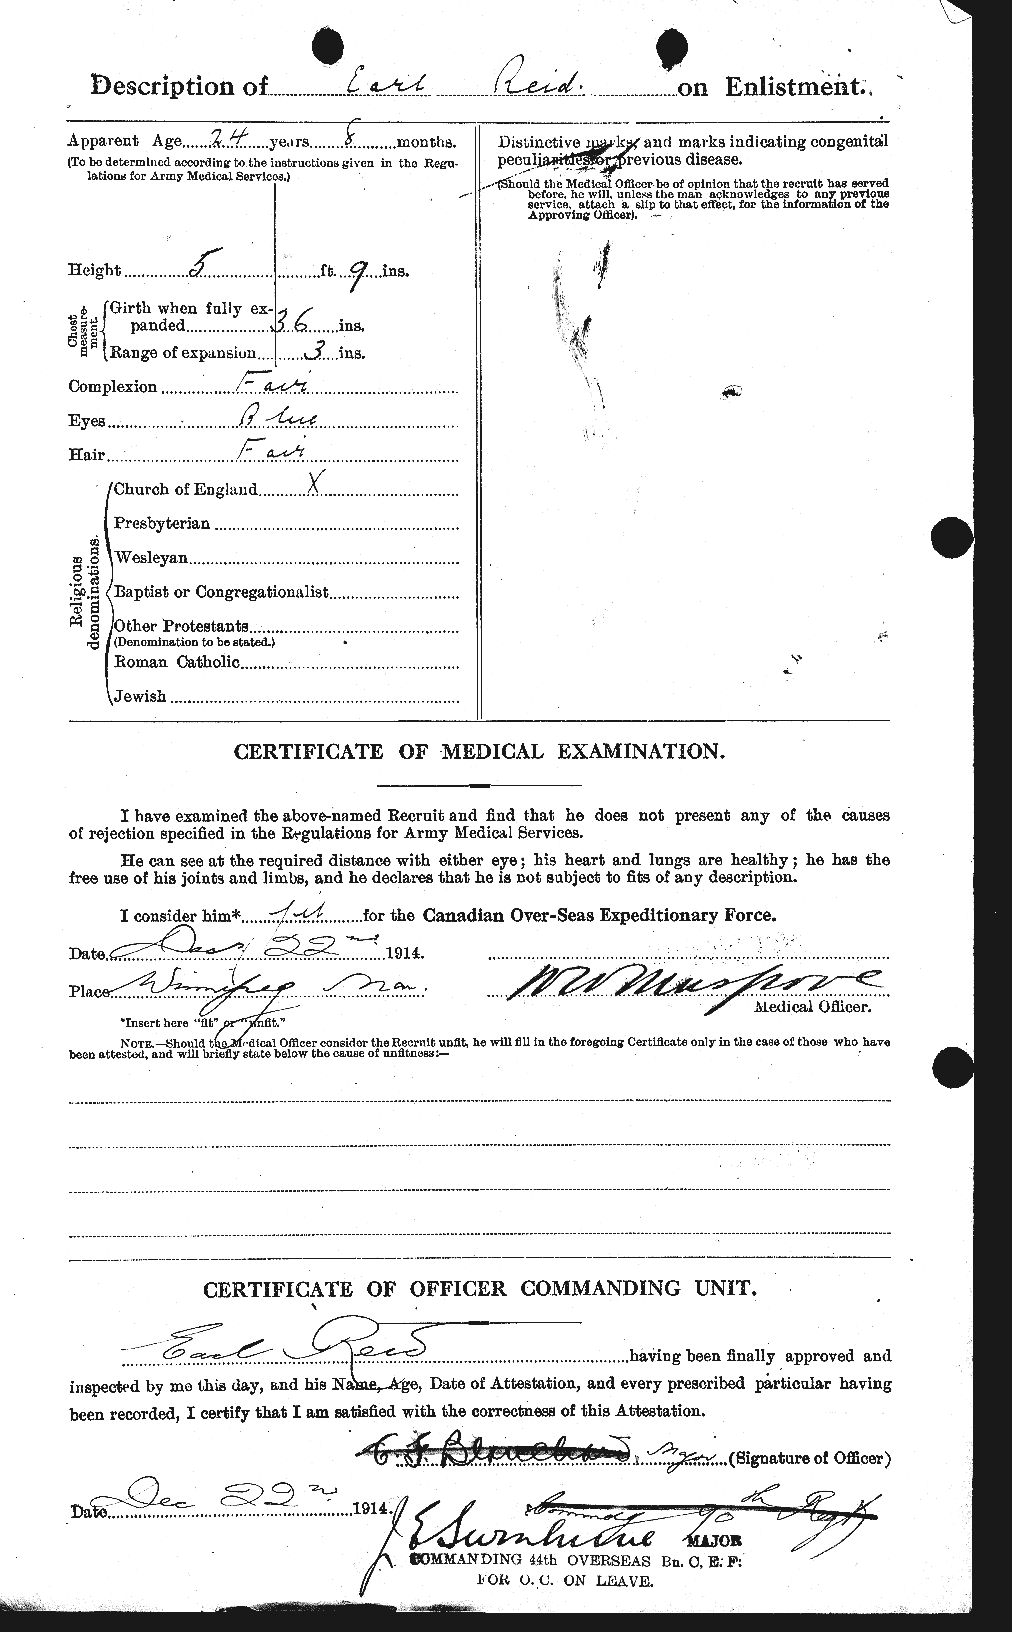 Personnel Records of the First World War - CEF 597973b